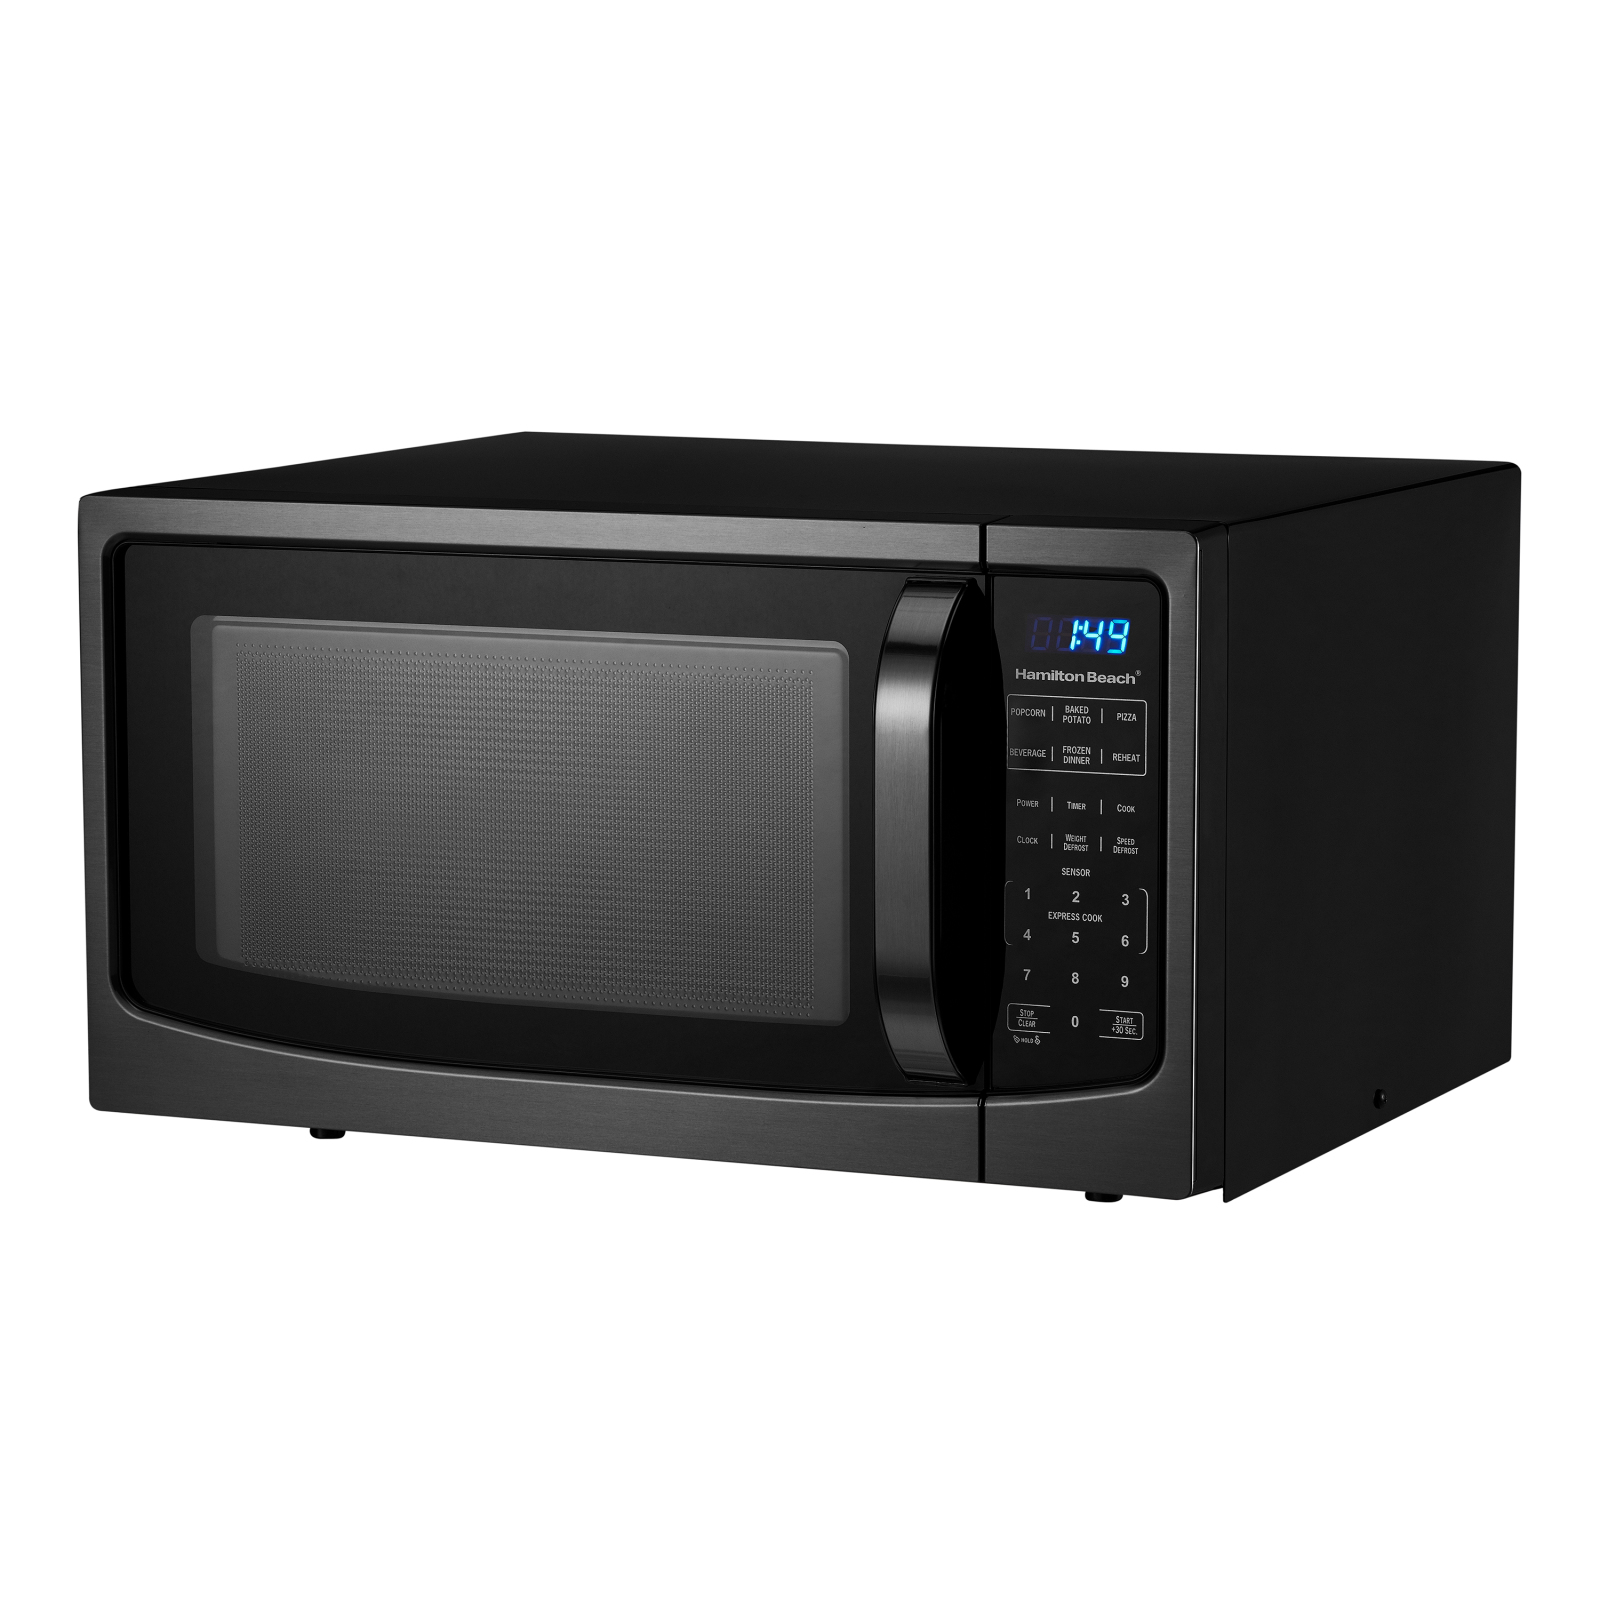 Hamilton Beach 1.6 Cu ft Black Stainless Steel Digital Microwave Oven, New - image 1 of 5